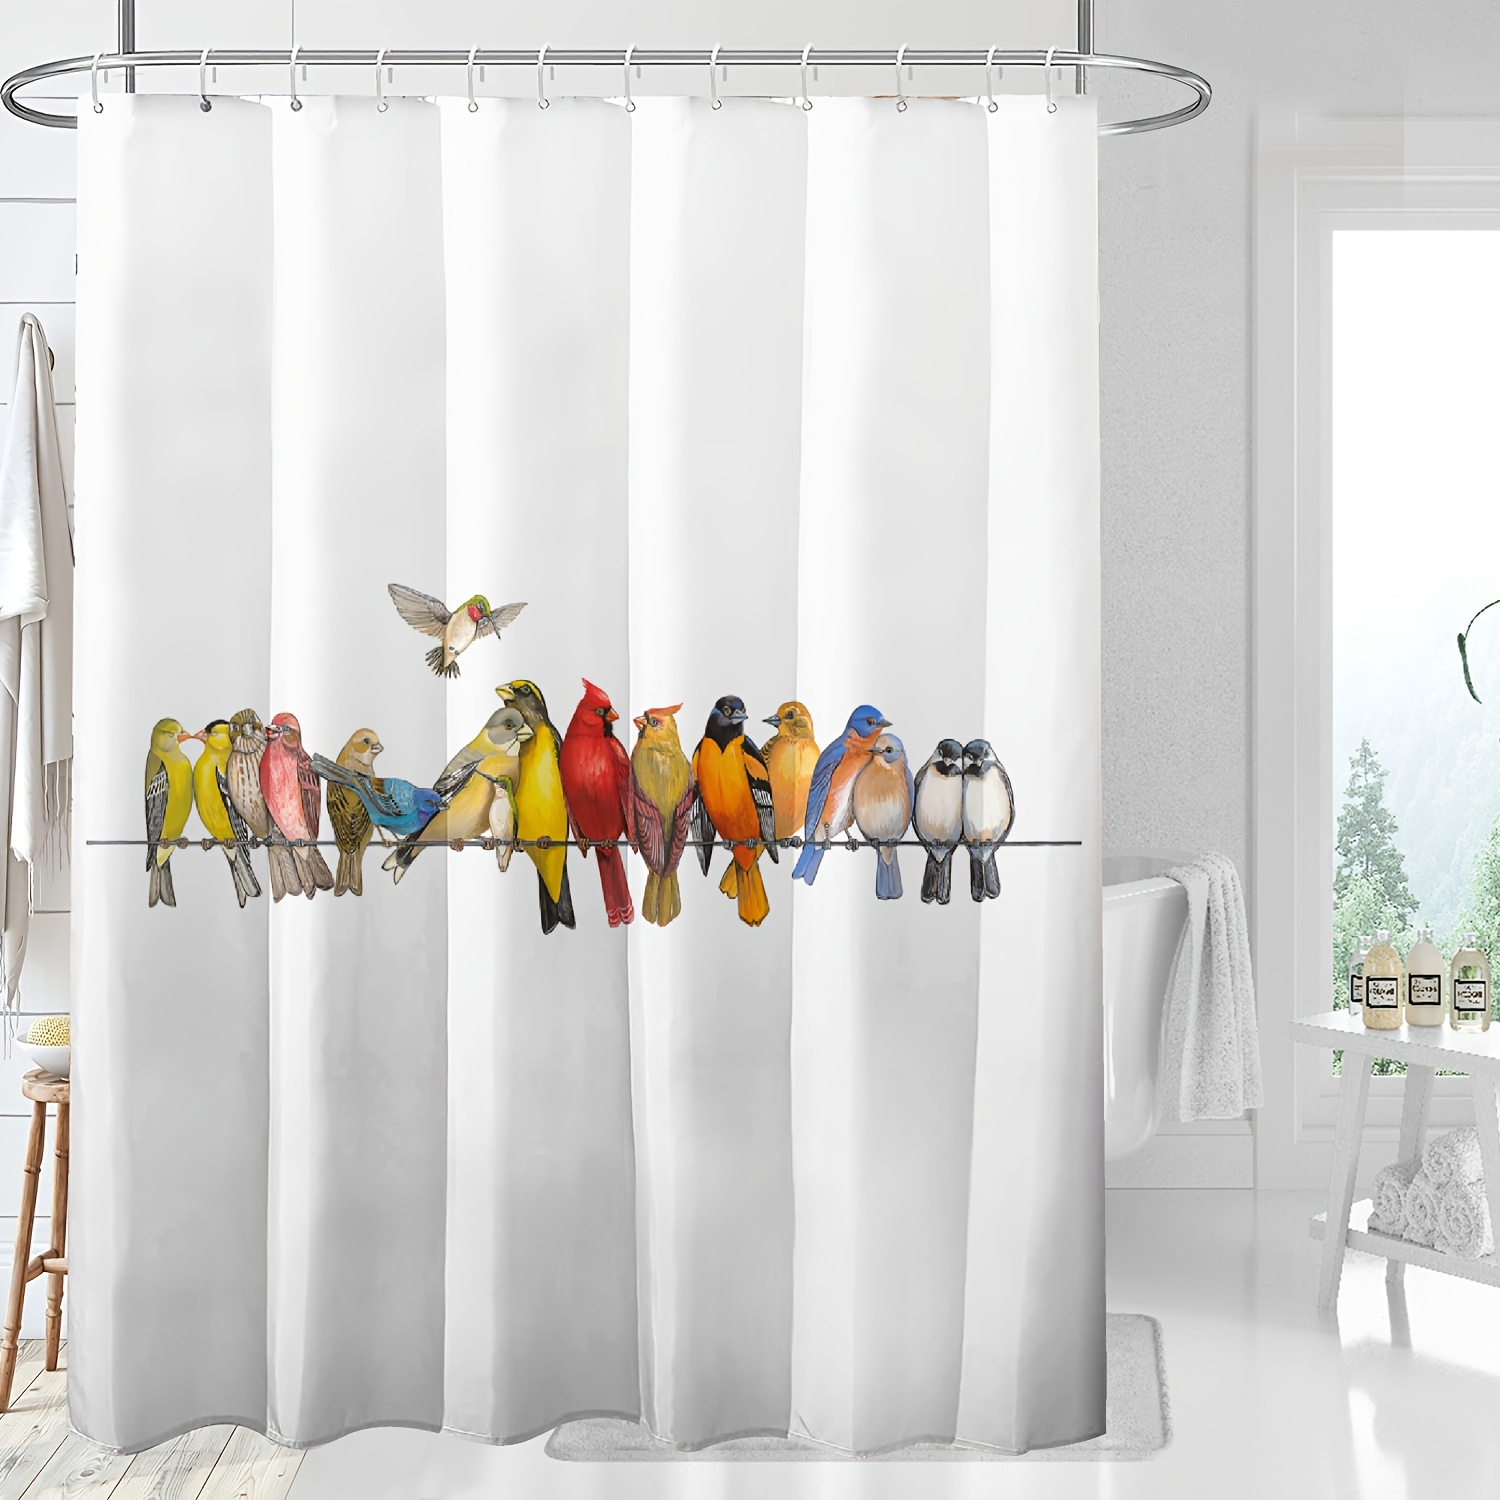 

Charming Parrot Print Shower Curtain Set With Hooks - Waterproof & Machine Washable Polyester, Perfect For Home Decor